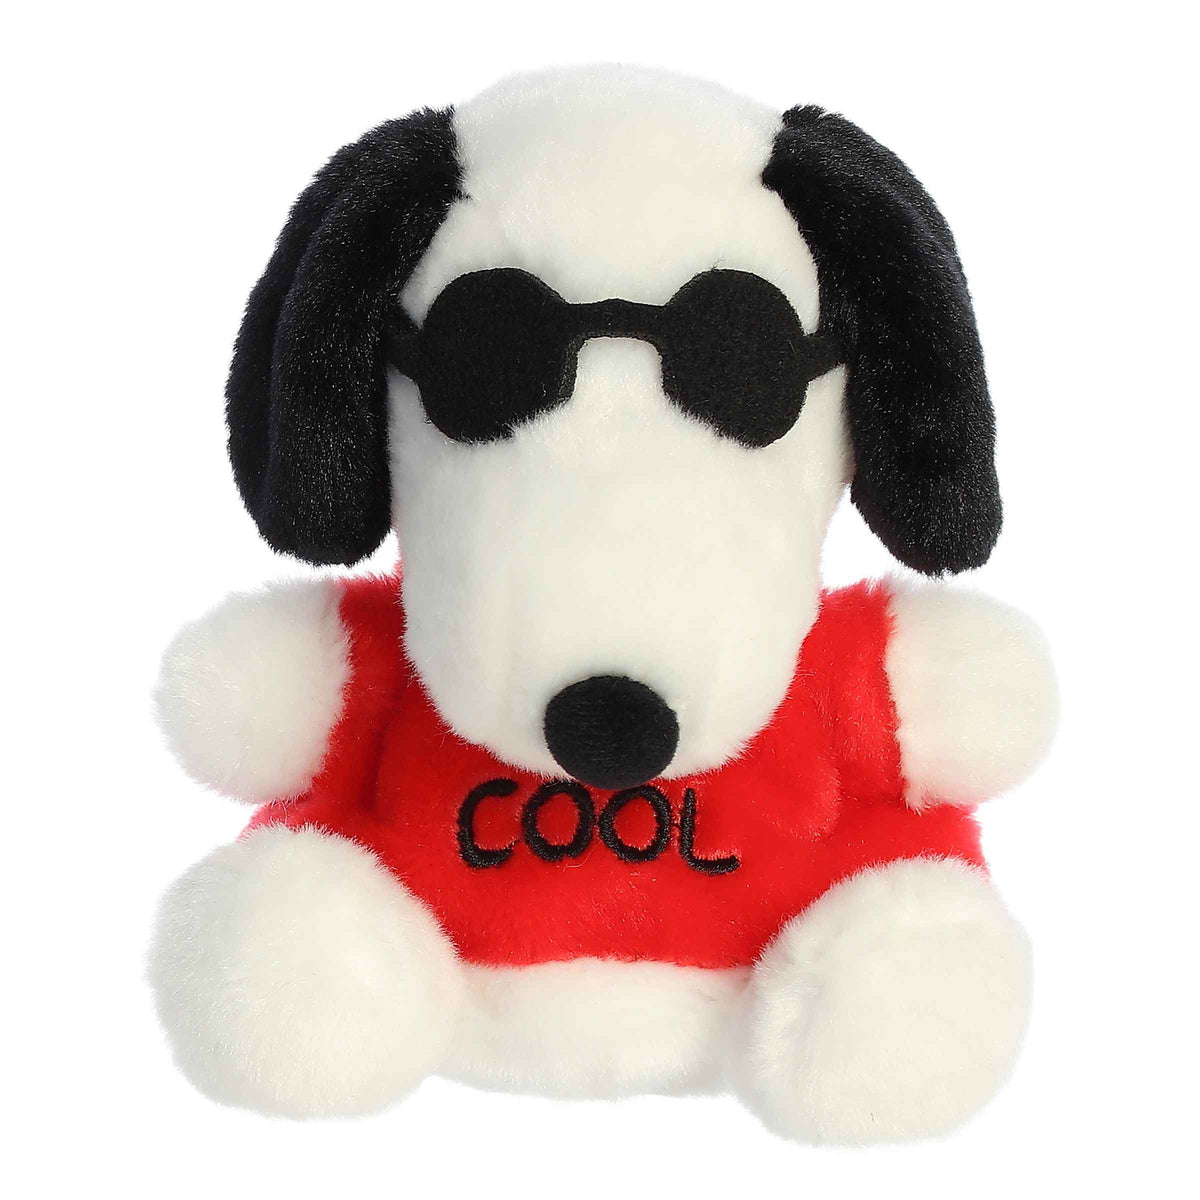 Joe Cool Palm Pals plush, Snoopy plush from the Peanuts collection with red shirt and sunglasses, epitomizes coolness